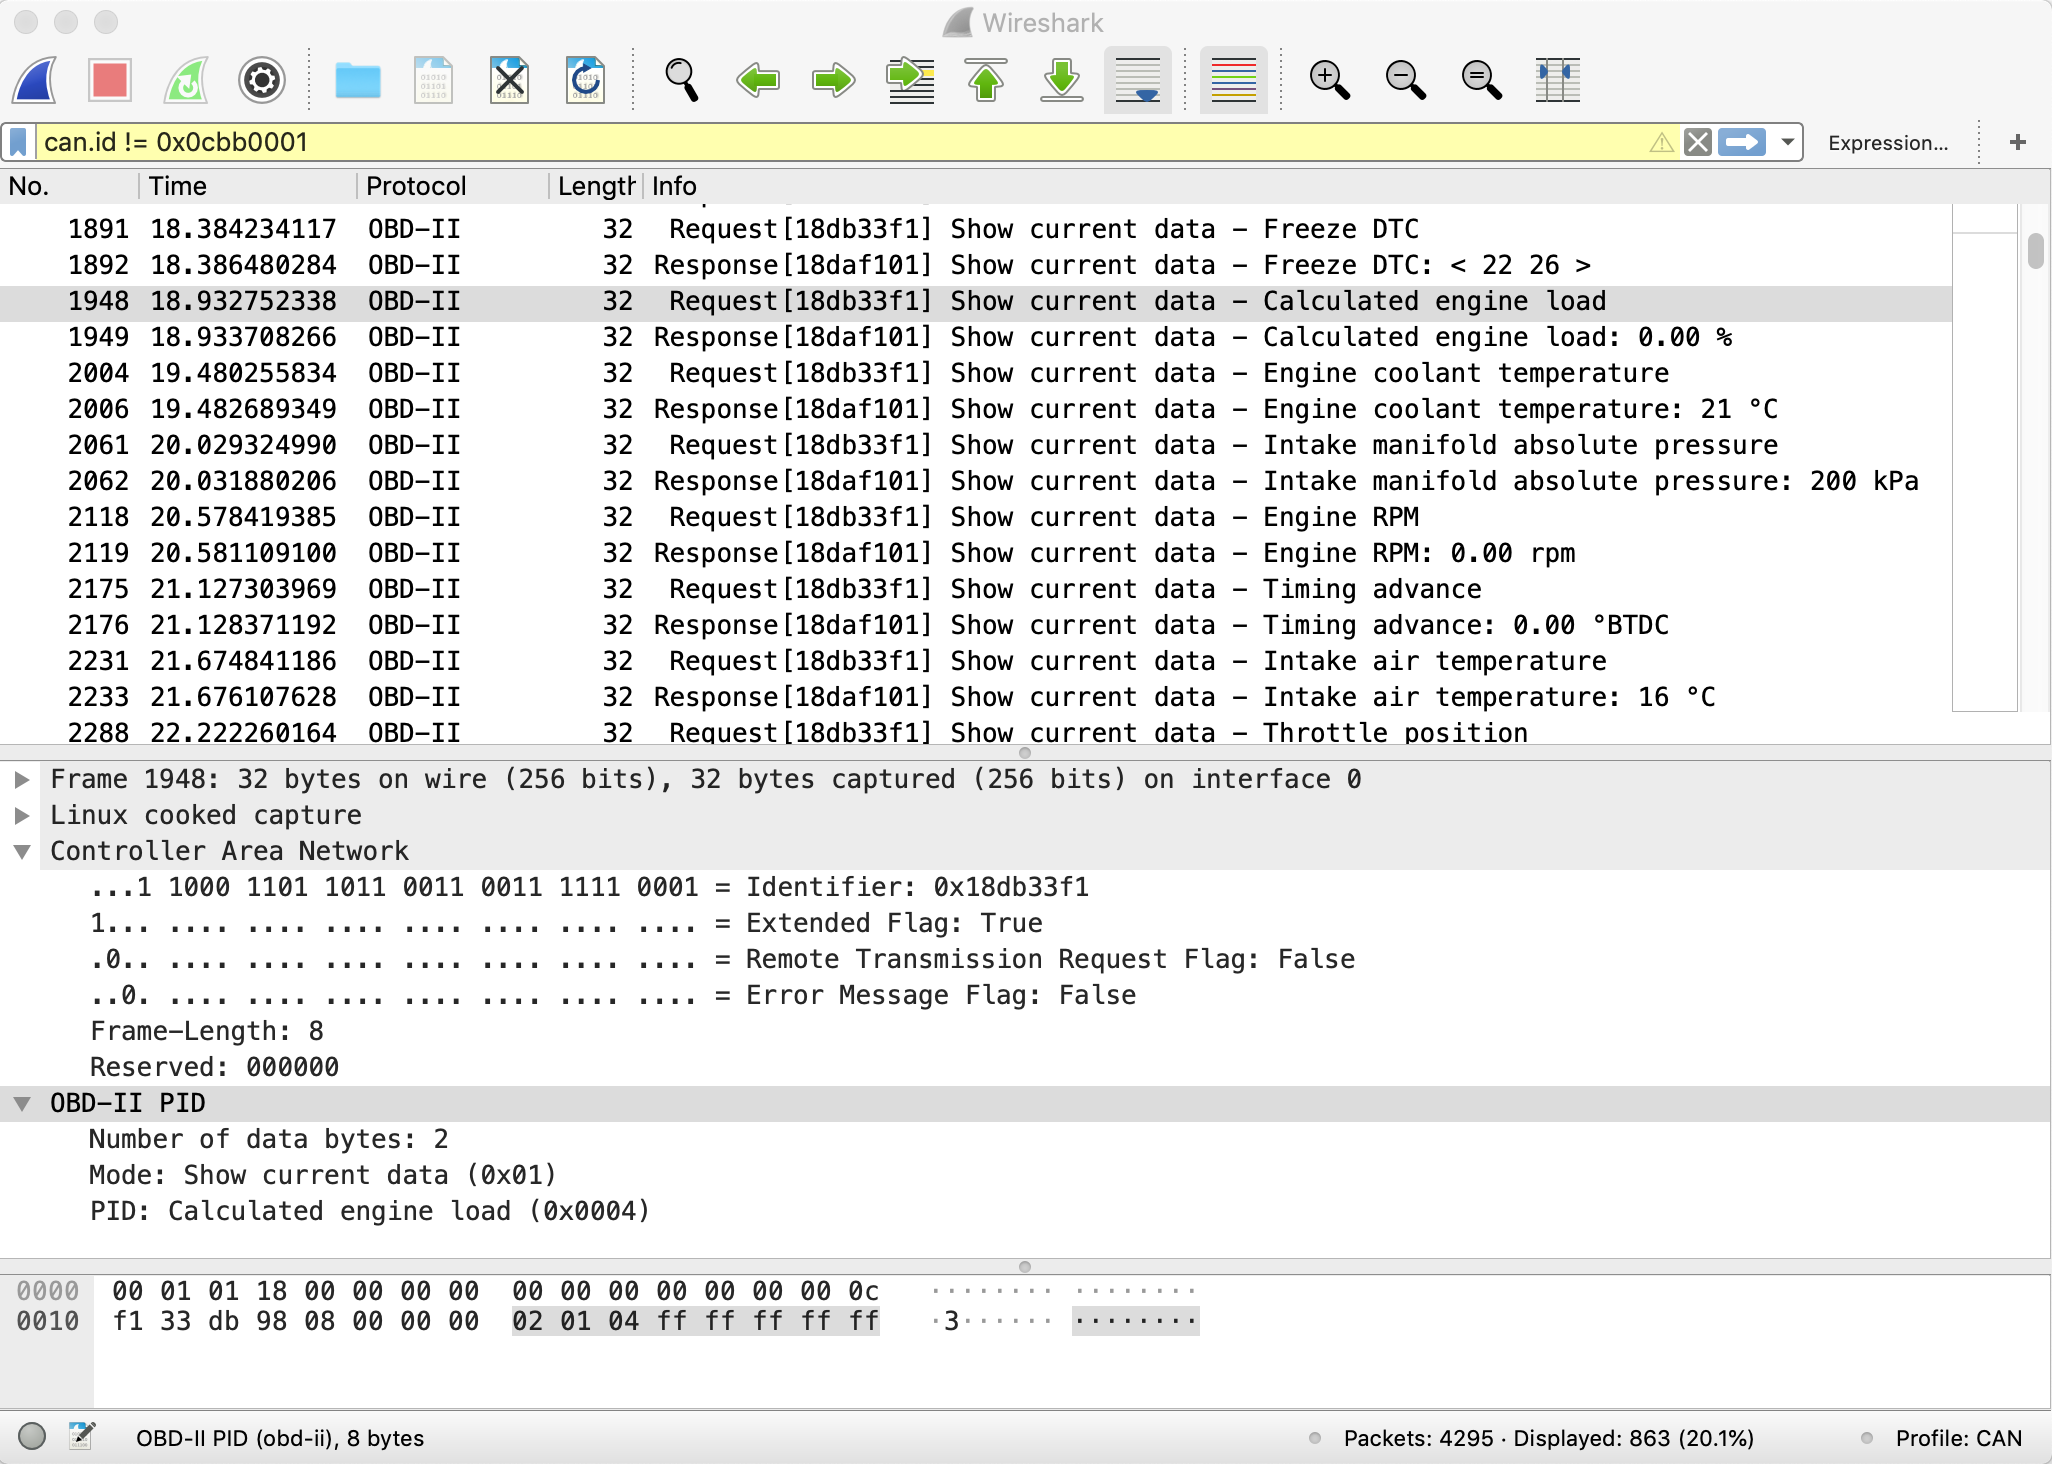 ECU Diagnostics – part 4 : Wireshark Patching and OBD-II Results